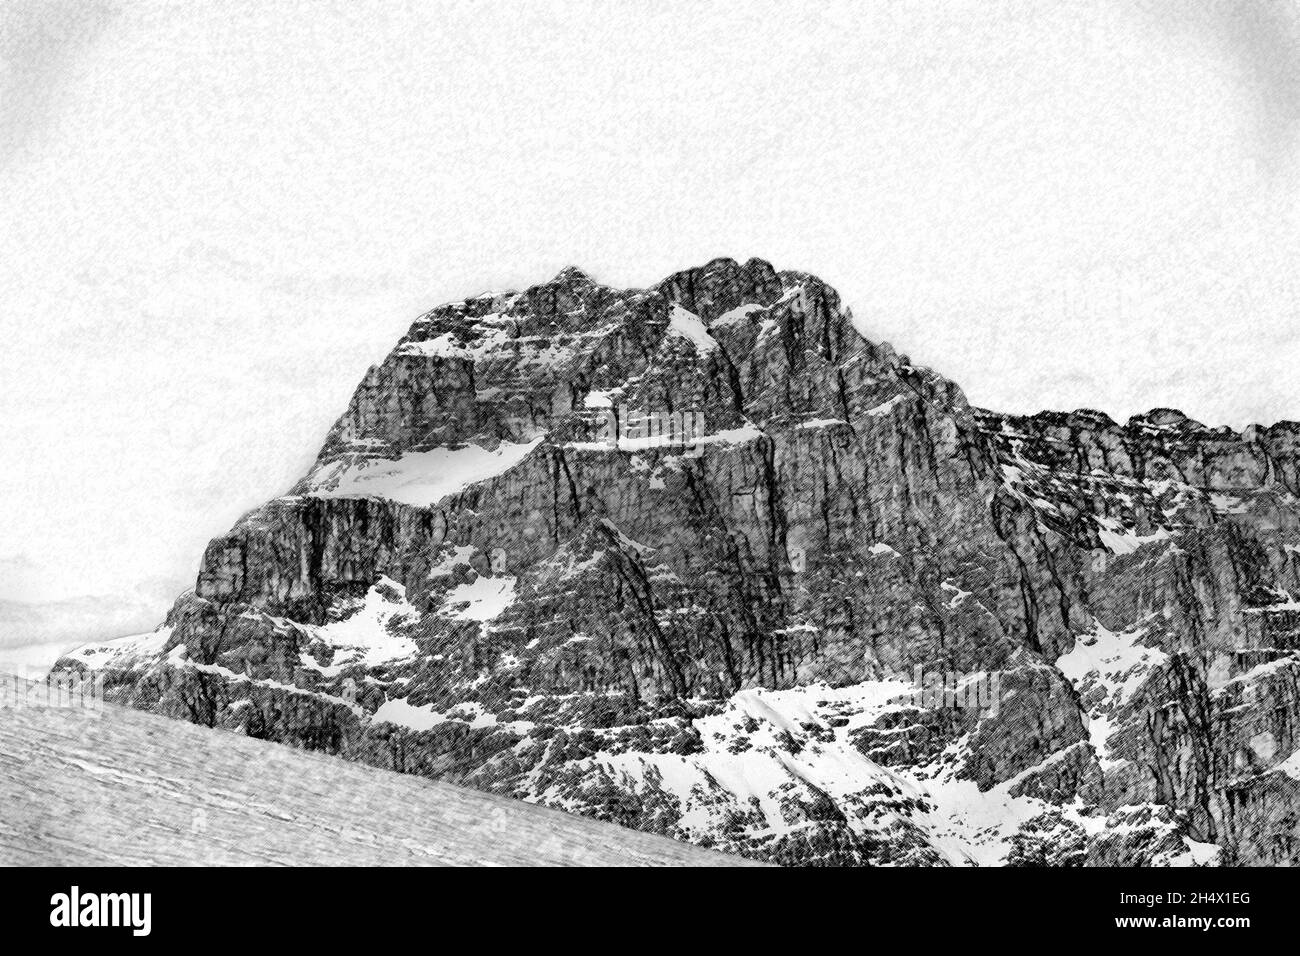 Illustration with charcoal technique of awesome dolomite peaks Stock Photo